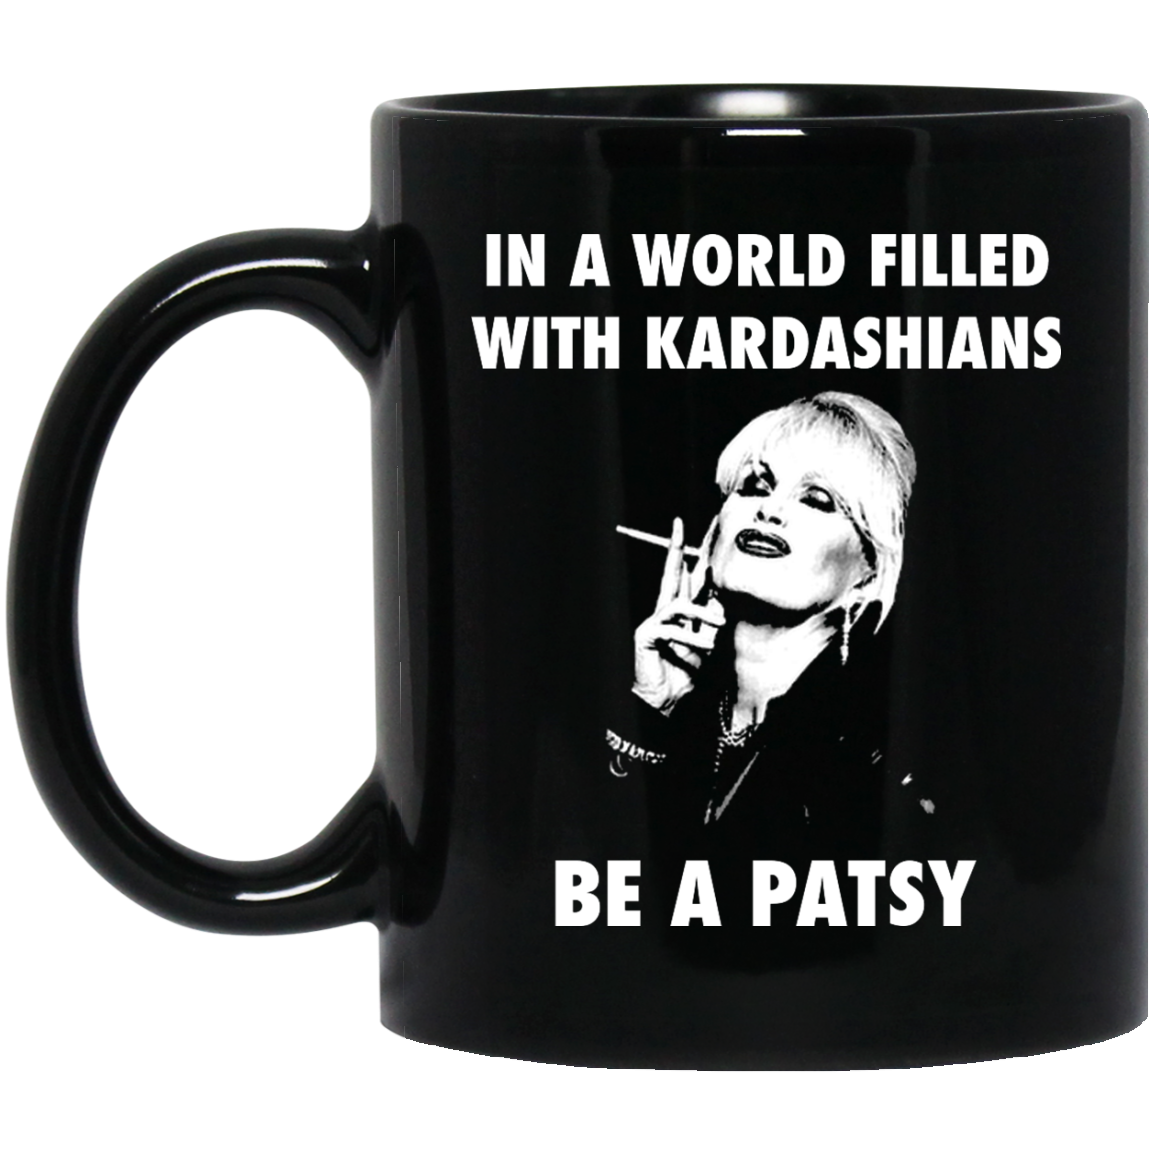 In A World Filled With Kardashians Be A Patsy mugs